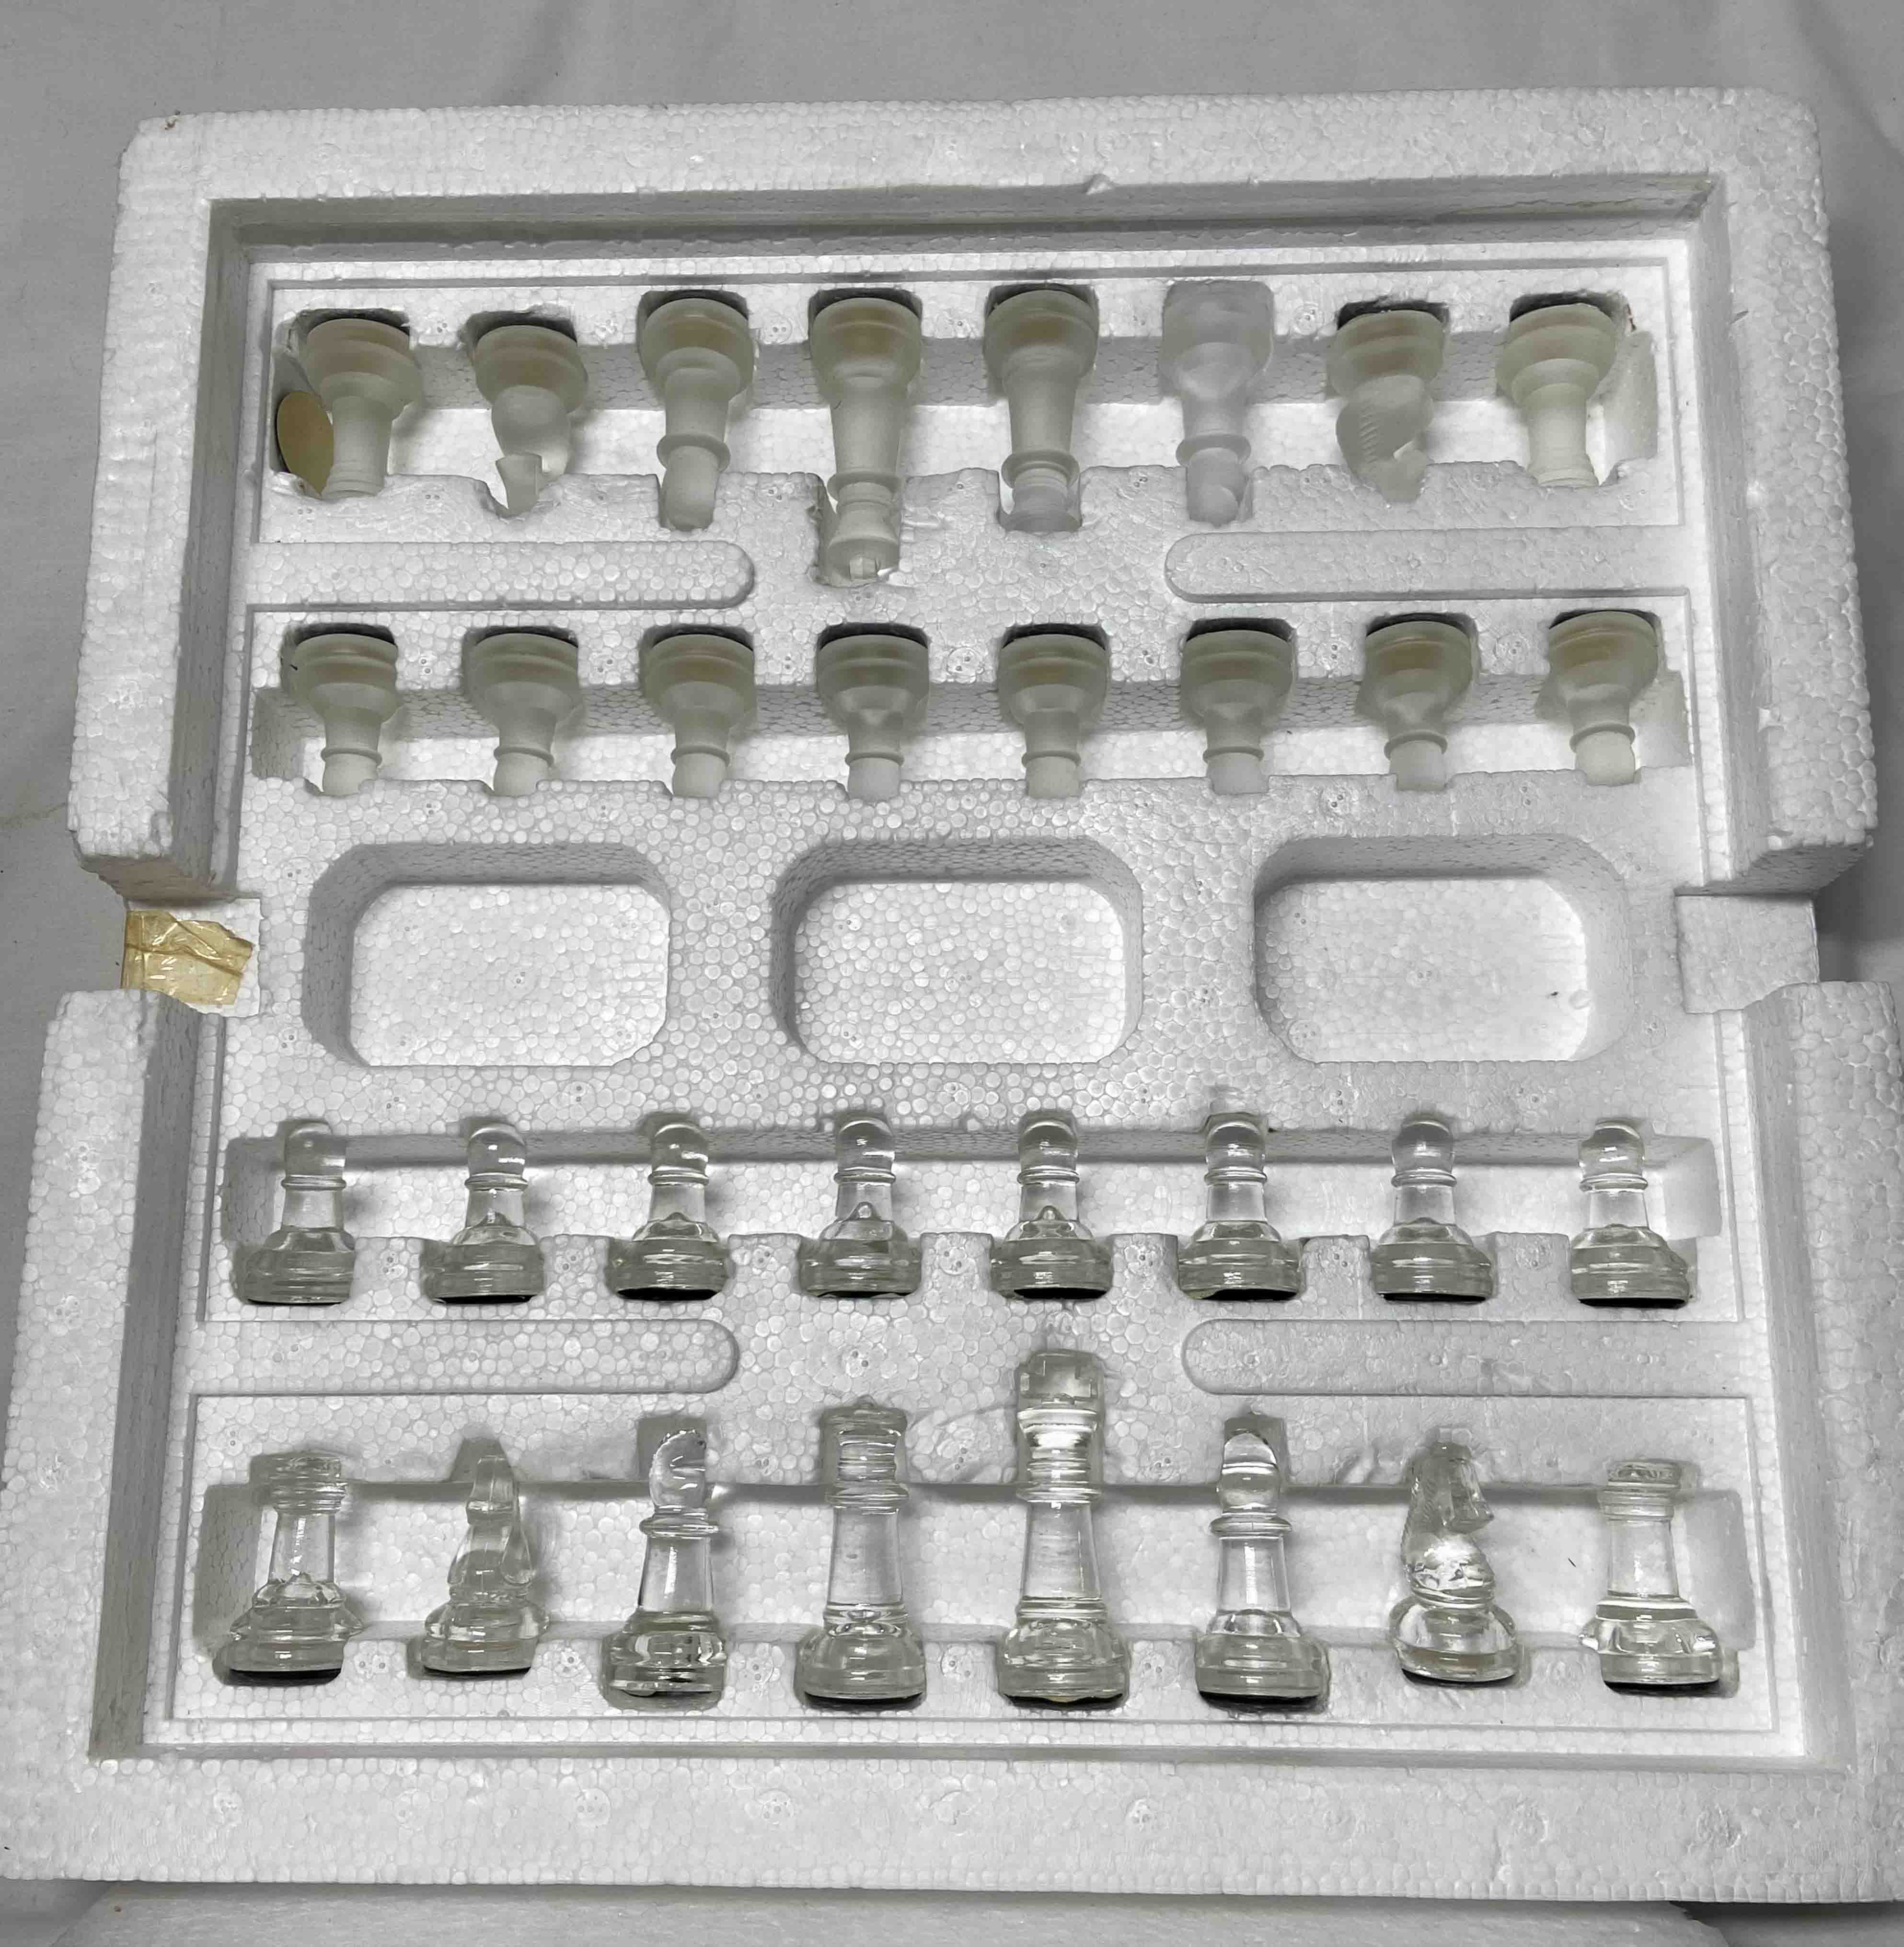 A glass chess set with opaque and clear chess pieces - Image 2 of 2